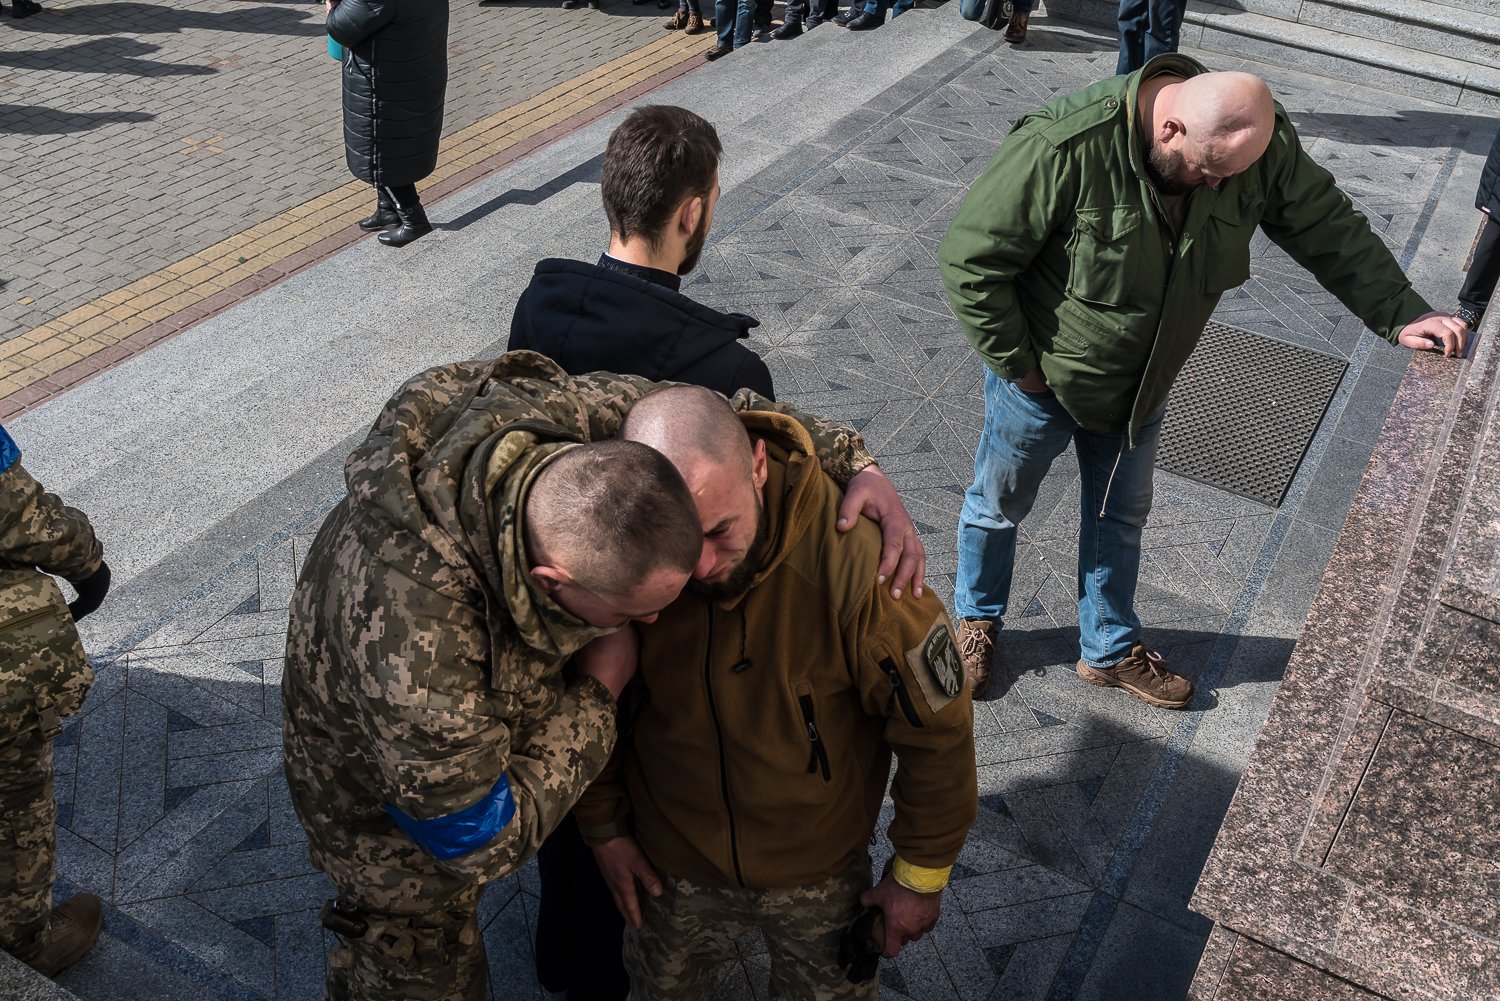  Mourners attend the funeral of two local Ukrainian soldiers, Vadym Hryniuk and Ivan Koshil, who were both killed in an attack on a military airfield in Lutsk early the previous morning at the Cathedral of the Holy Trinity on Saturday, March 12, 2022